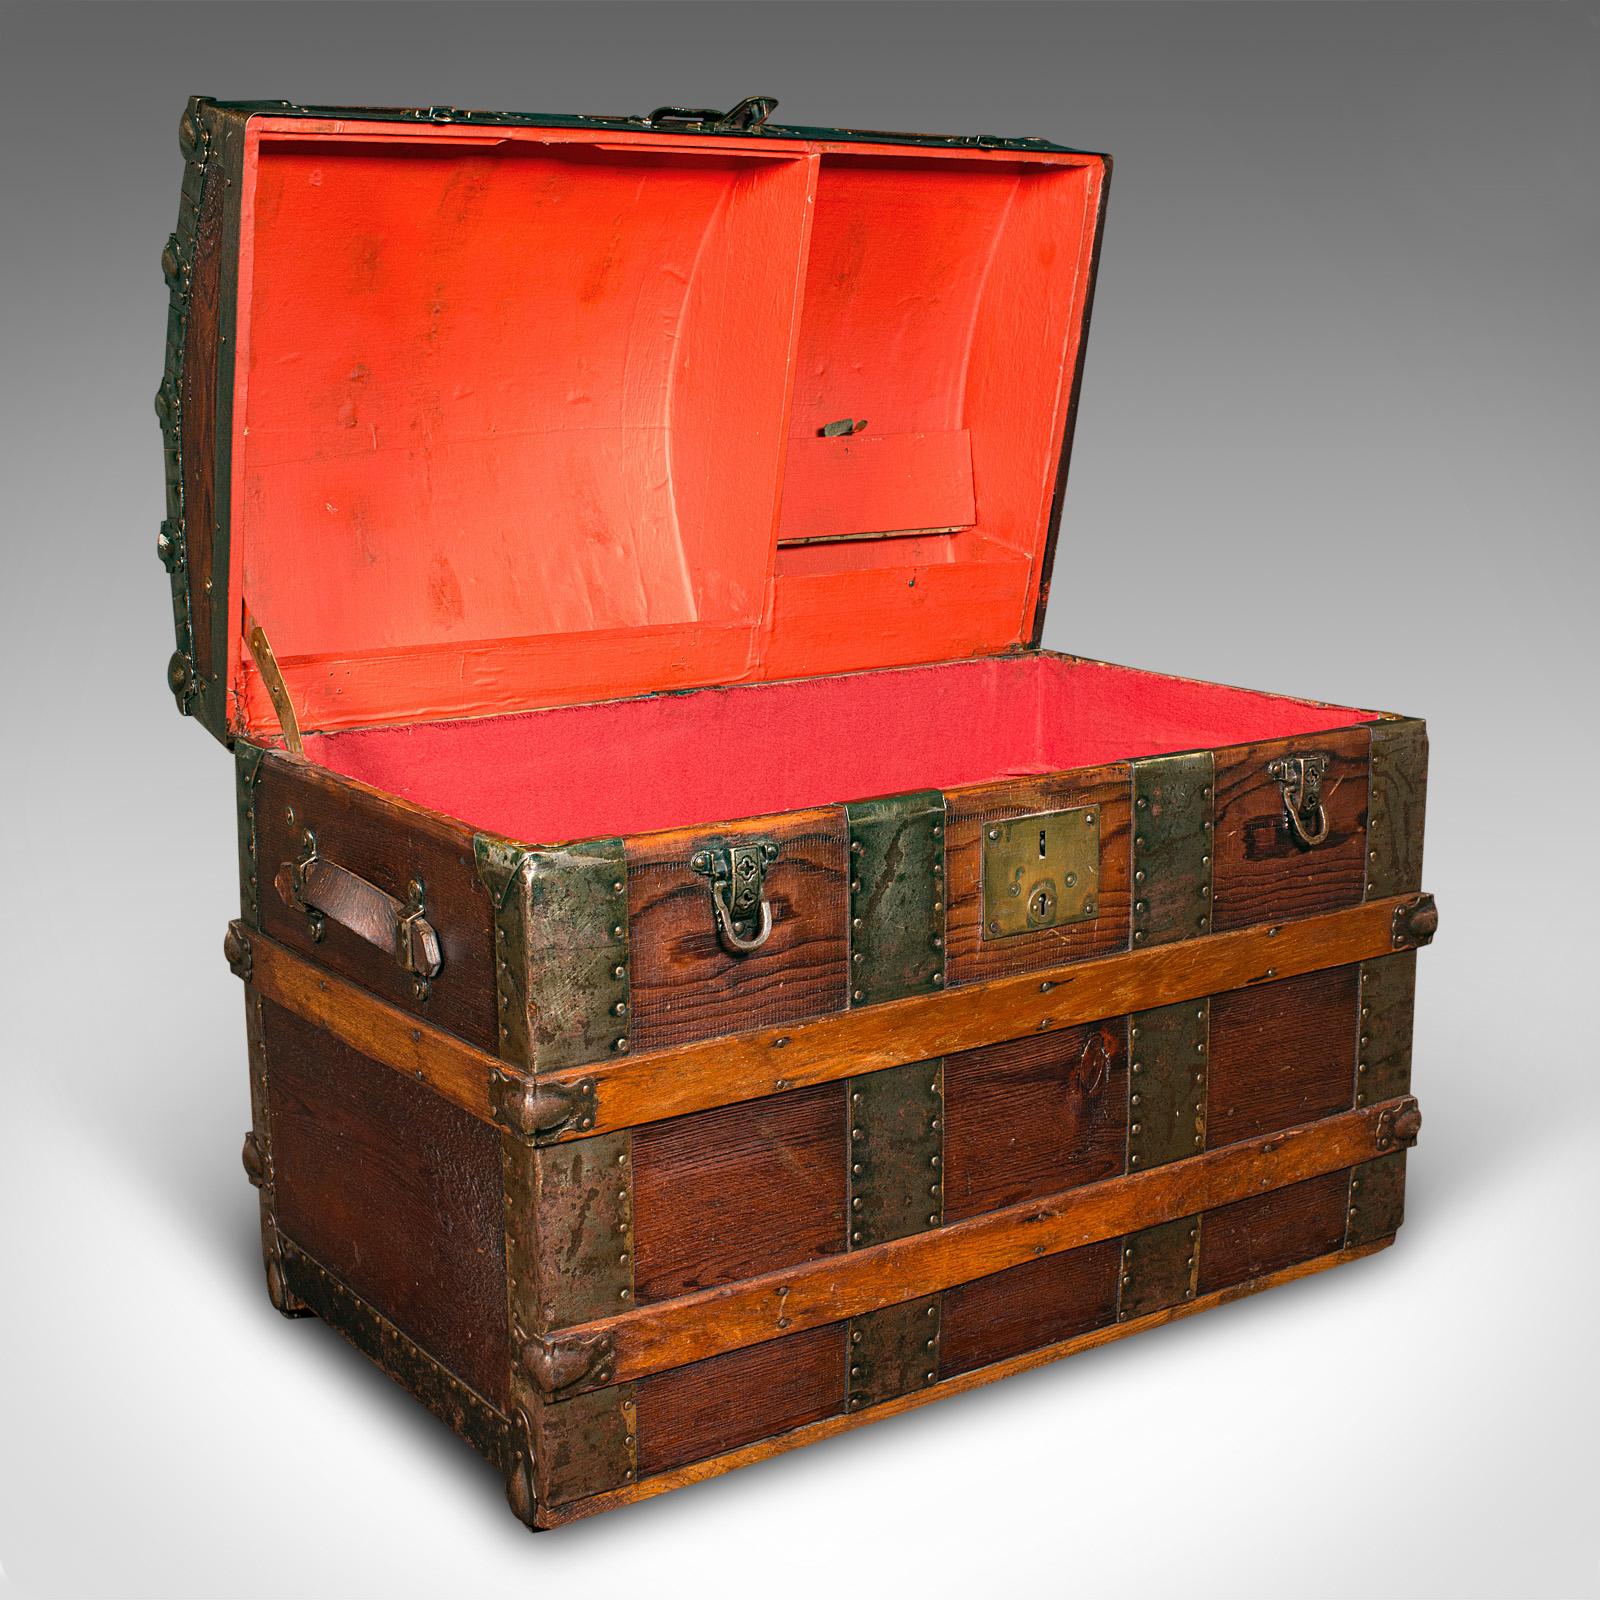 This is an antique dome topped chest. An English, pine and iron bound shipping trunk, dating to the mid Victorian period, circa 1870.

Superb presentation to this distinctive and versatile chest
Displays a desirable aged patina and in good original